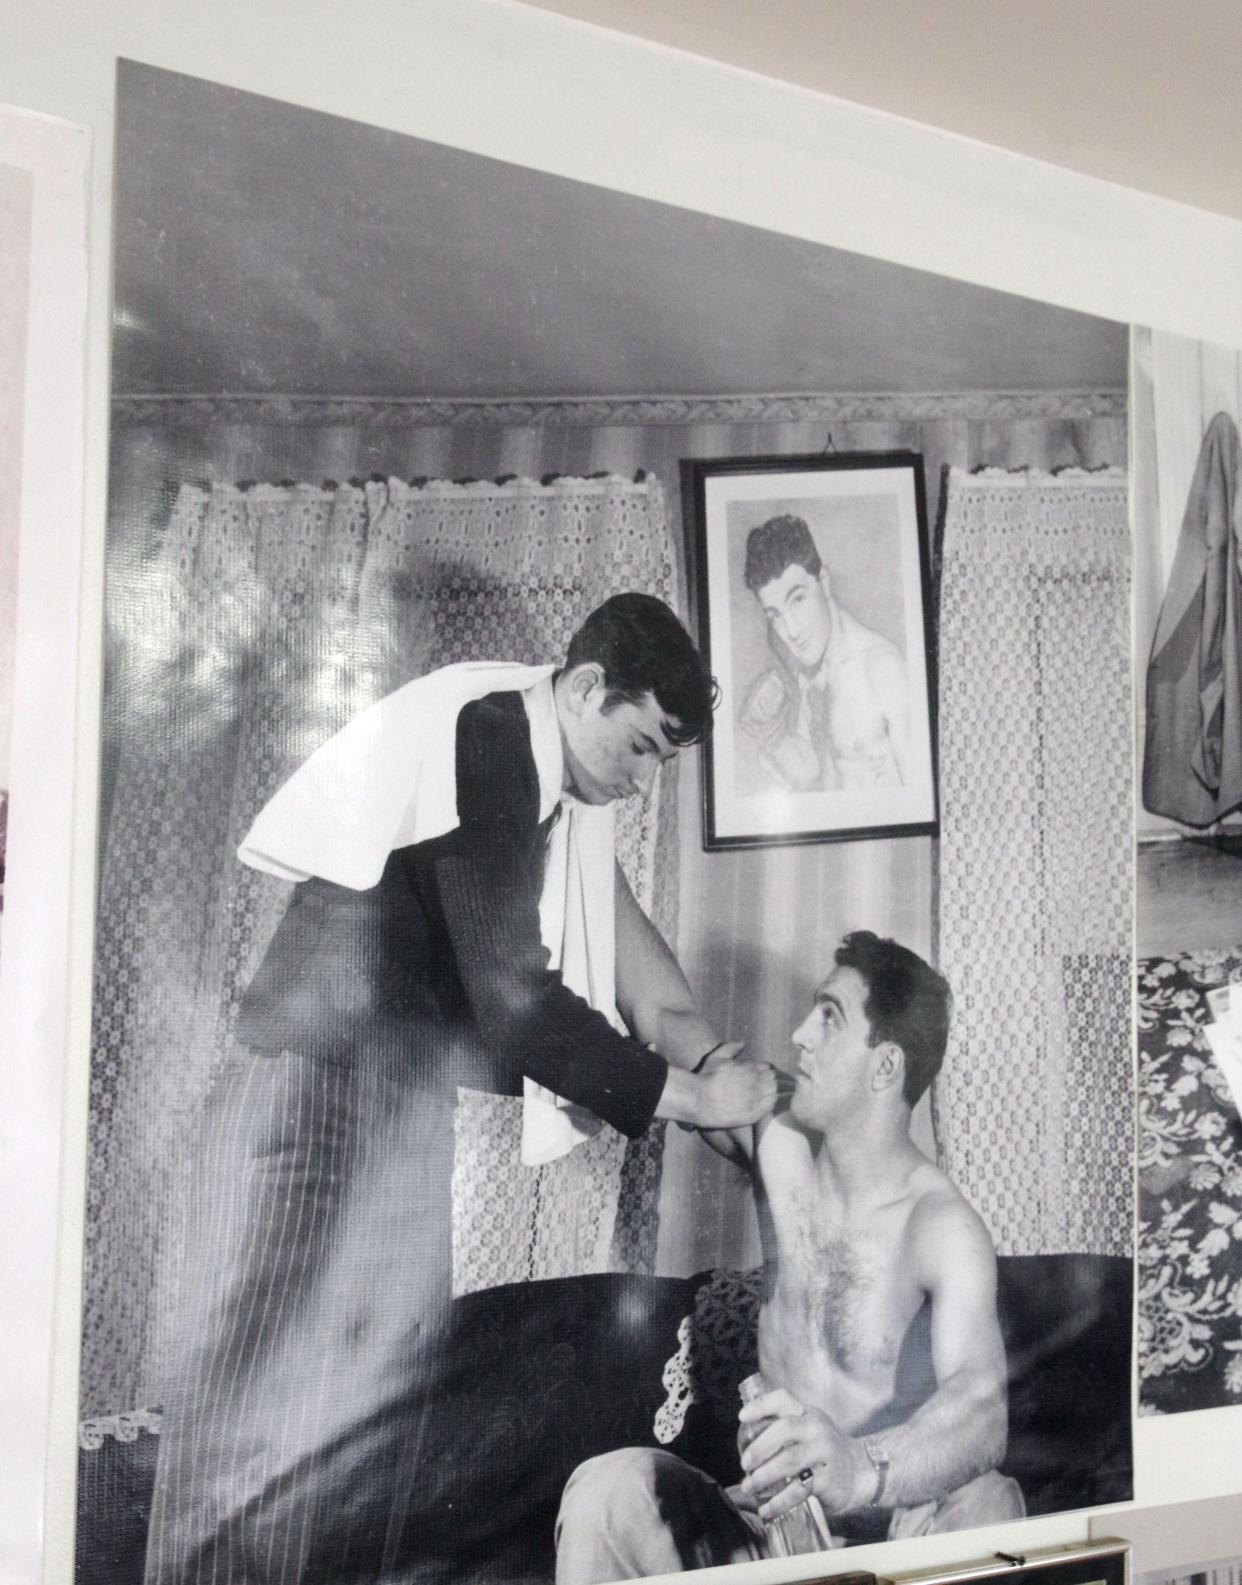 According to the Marciano house's current owner Mark Casieri, the heavyweight champ built a ring in his backyard to train, and his trainers would come to work with him. In this photograph which hangs in the living room, one of his handlers gives him a rub down after a workout. Seen on Monday, April 29, 2024.